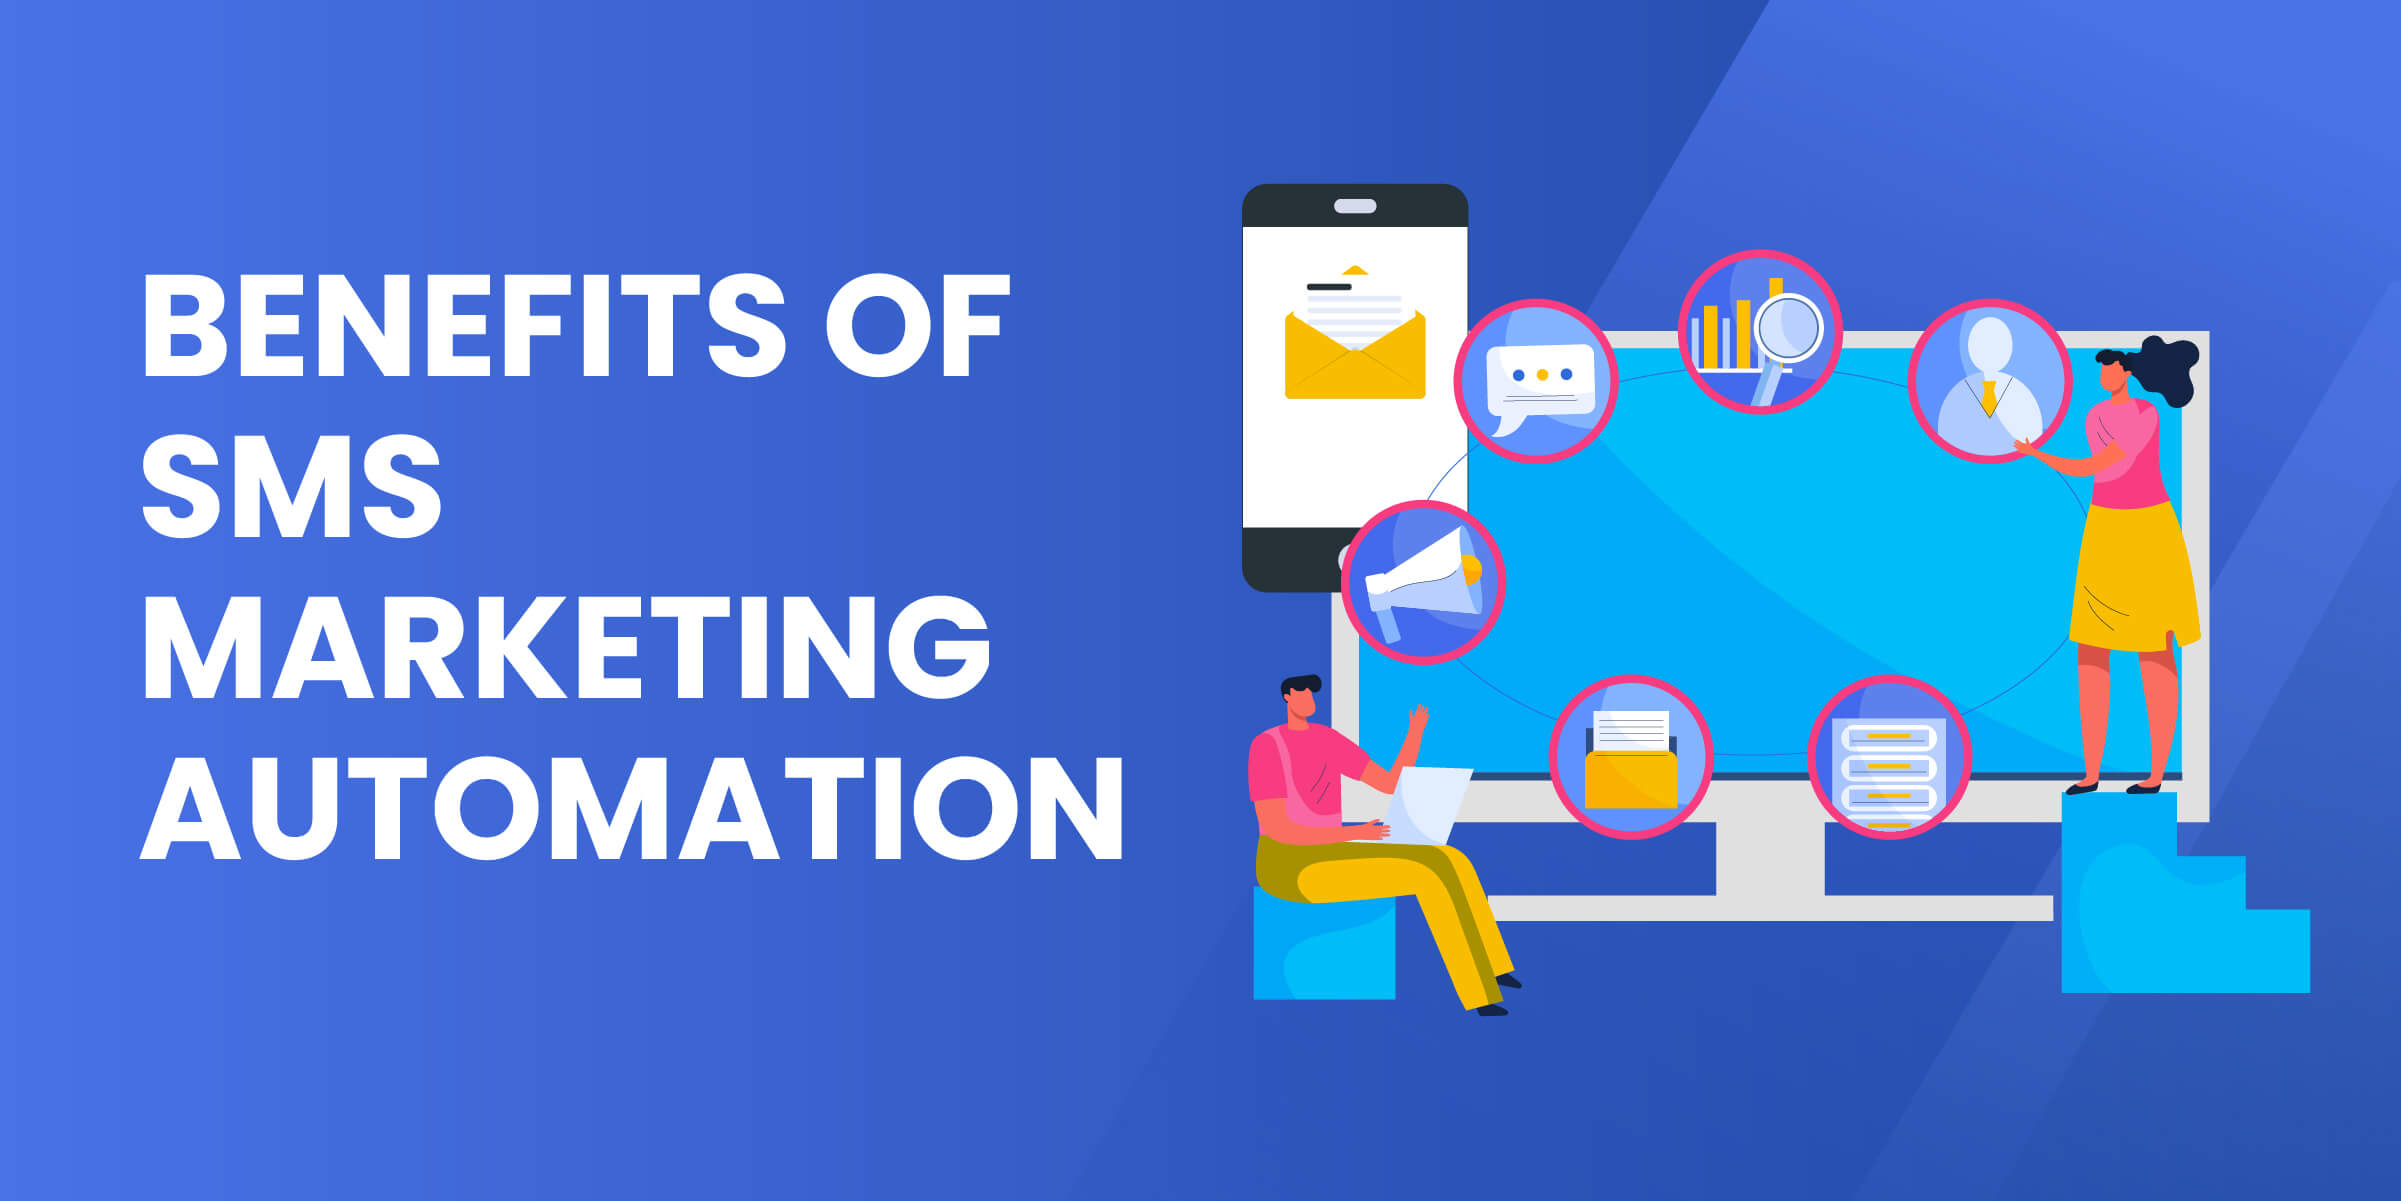 Benefits of SMS Marketing Automation